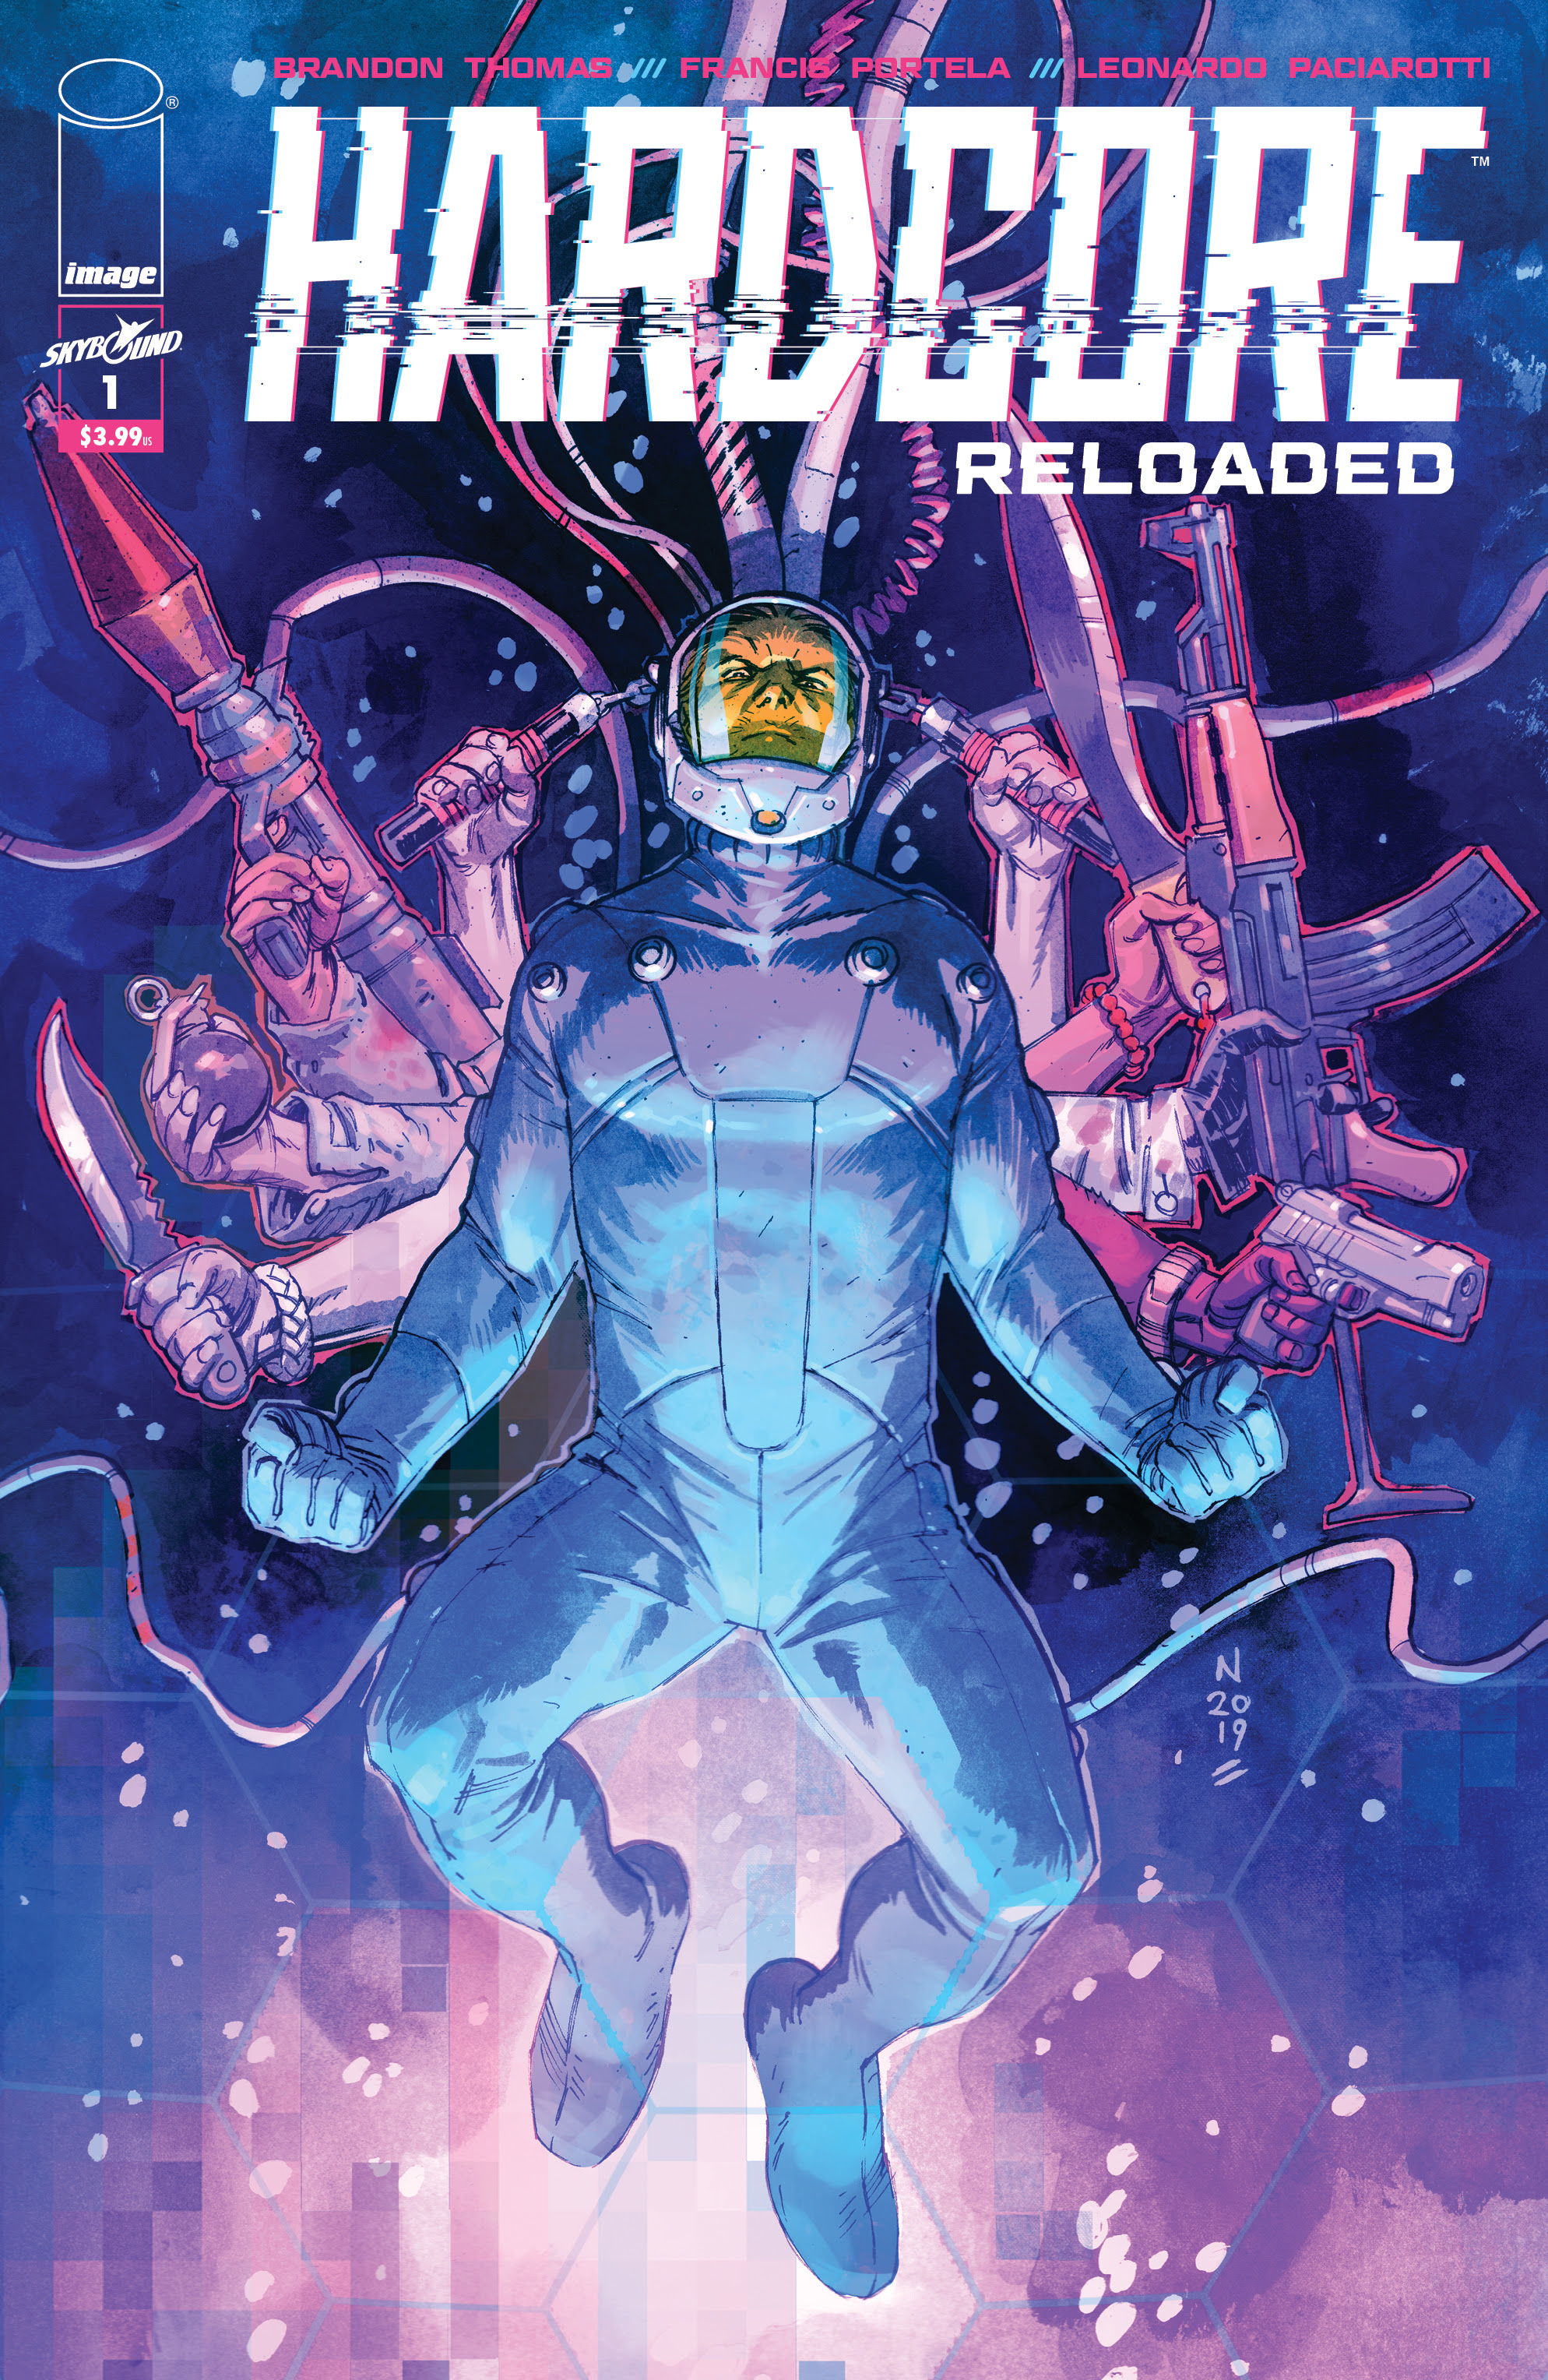 Image announces new five-issue miniseries, Hardcore:Reloaded